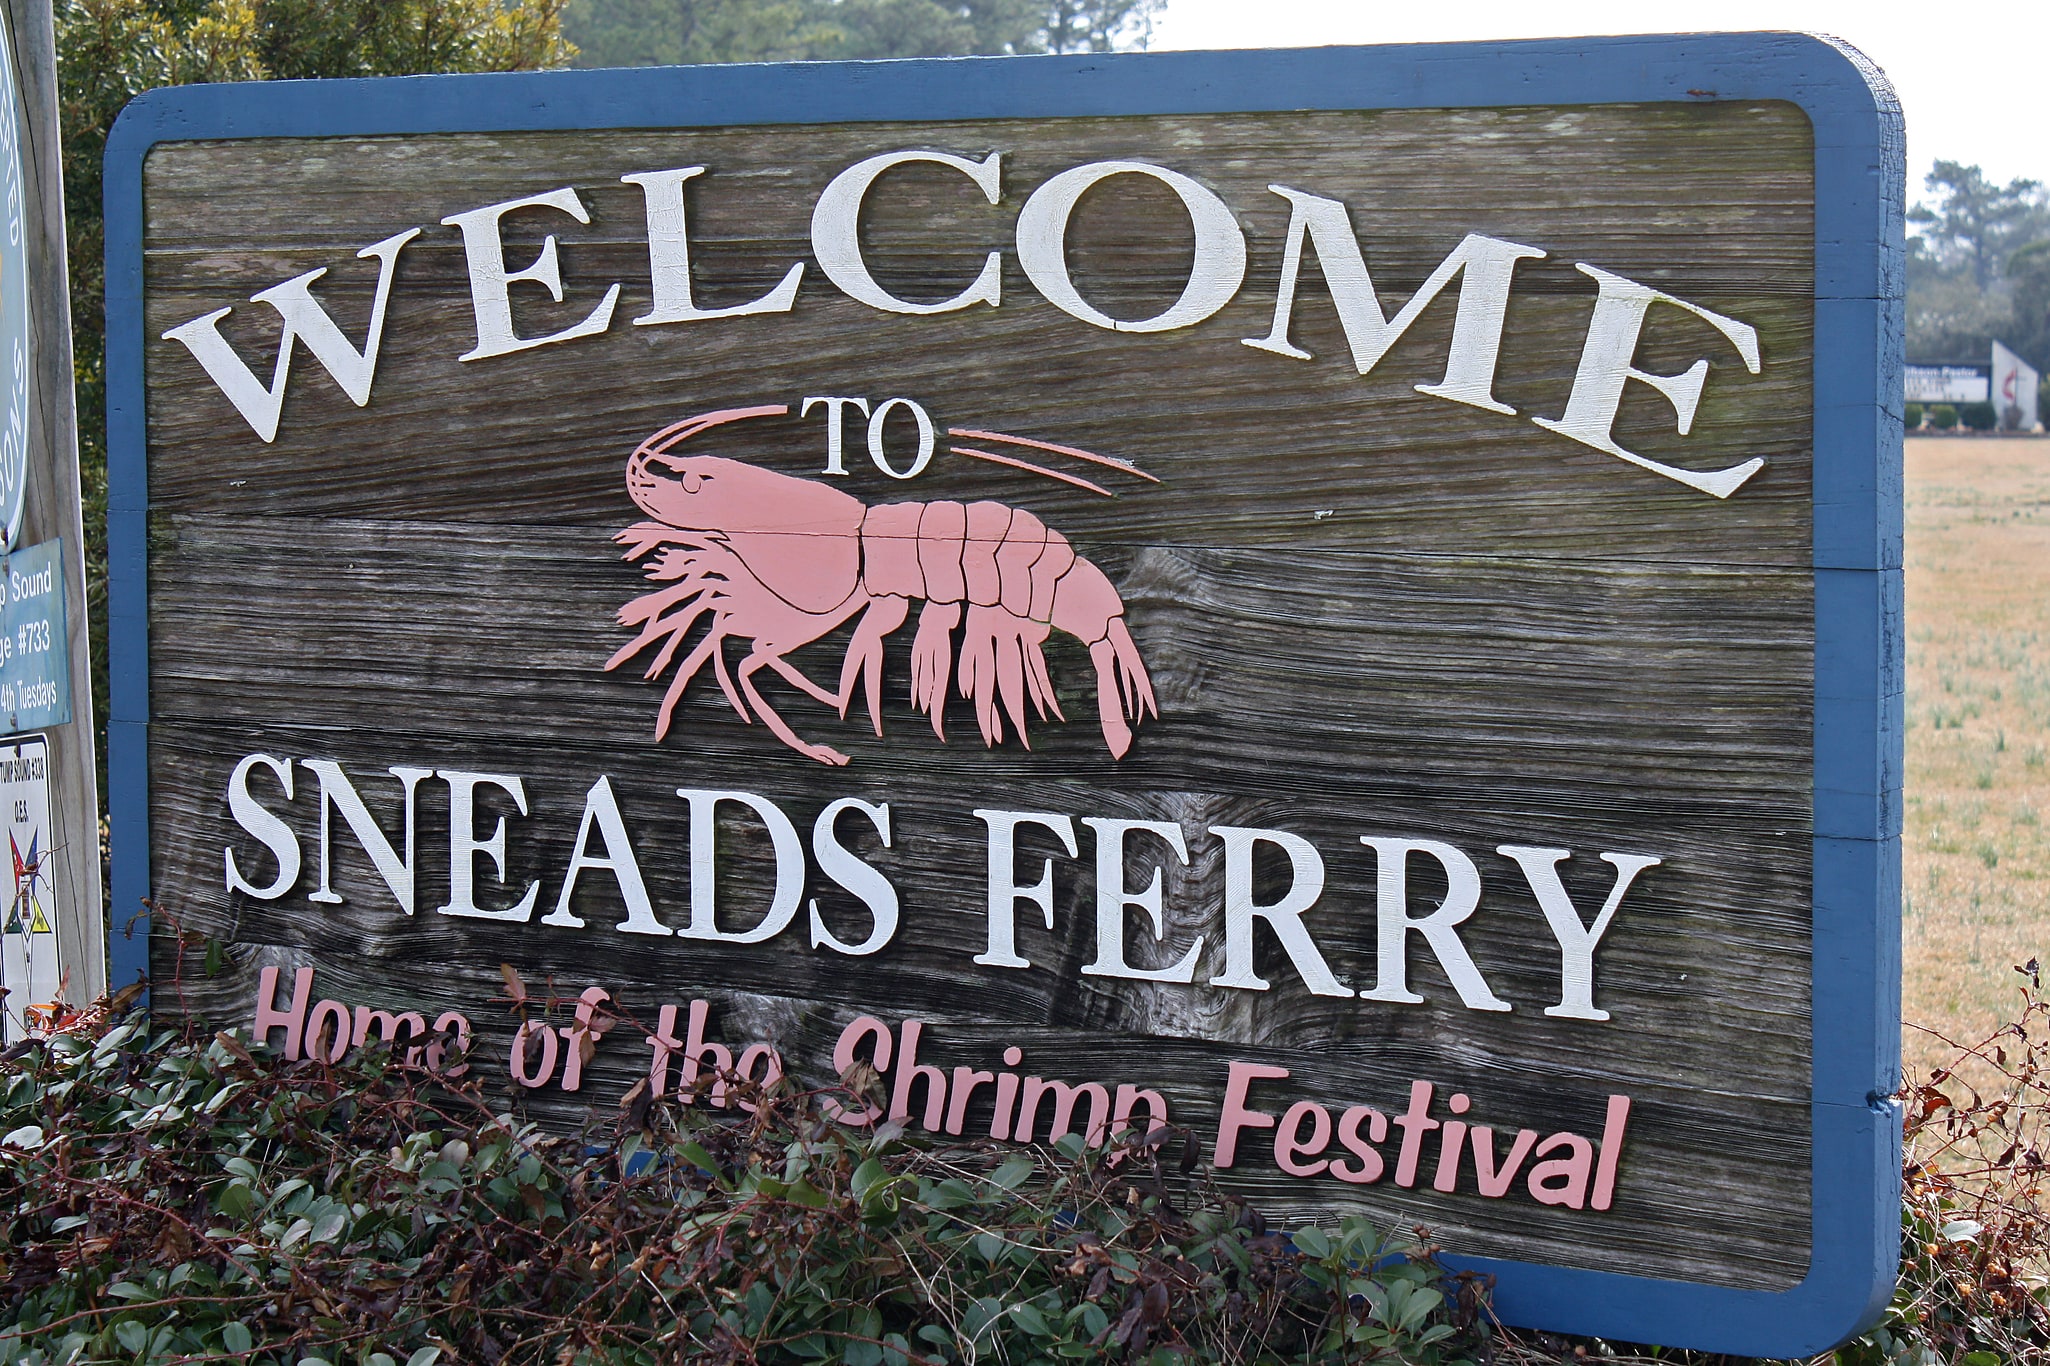 Sneads Ferry, United States